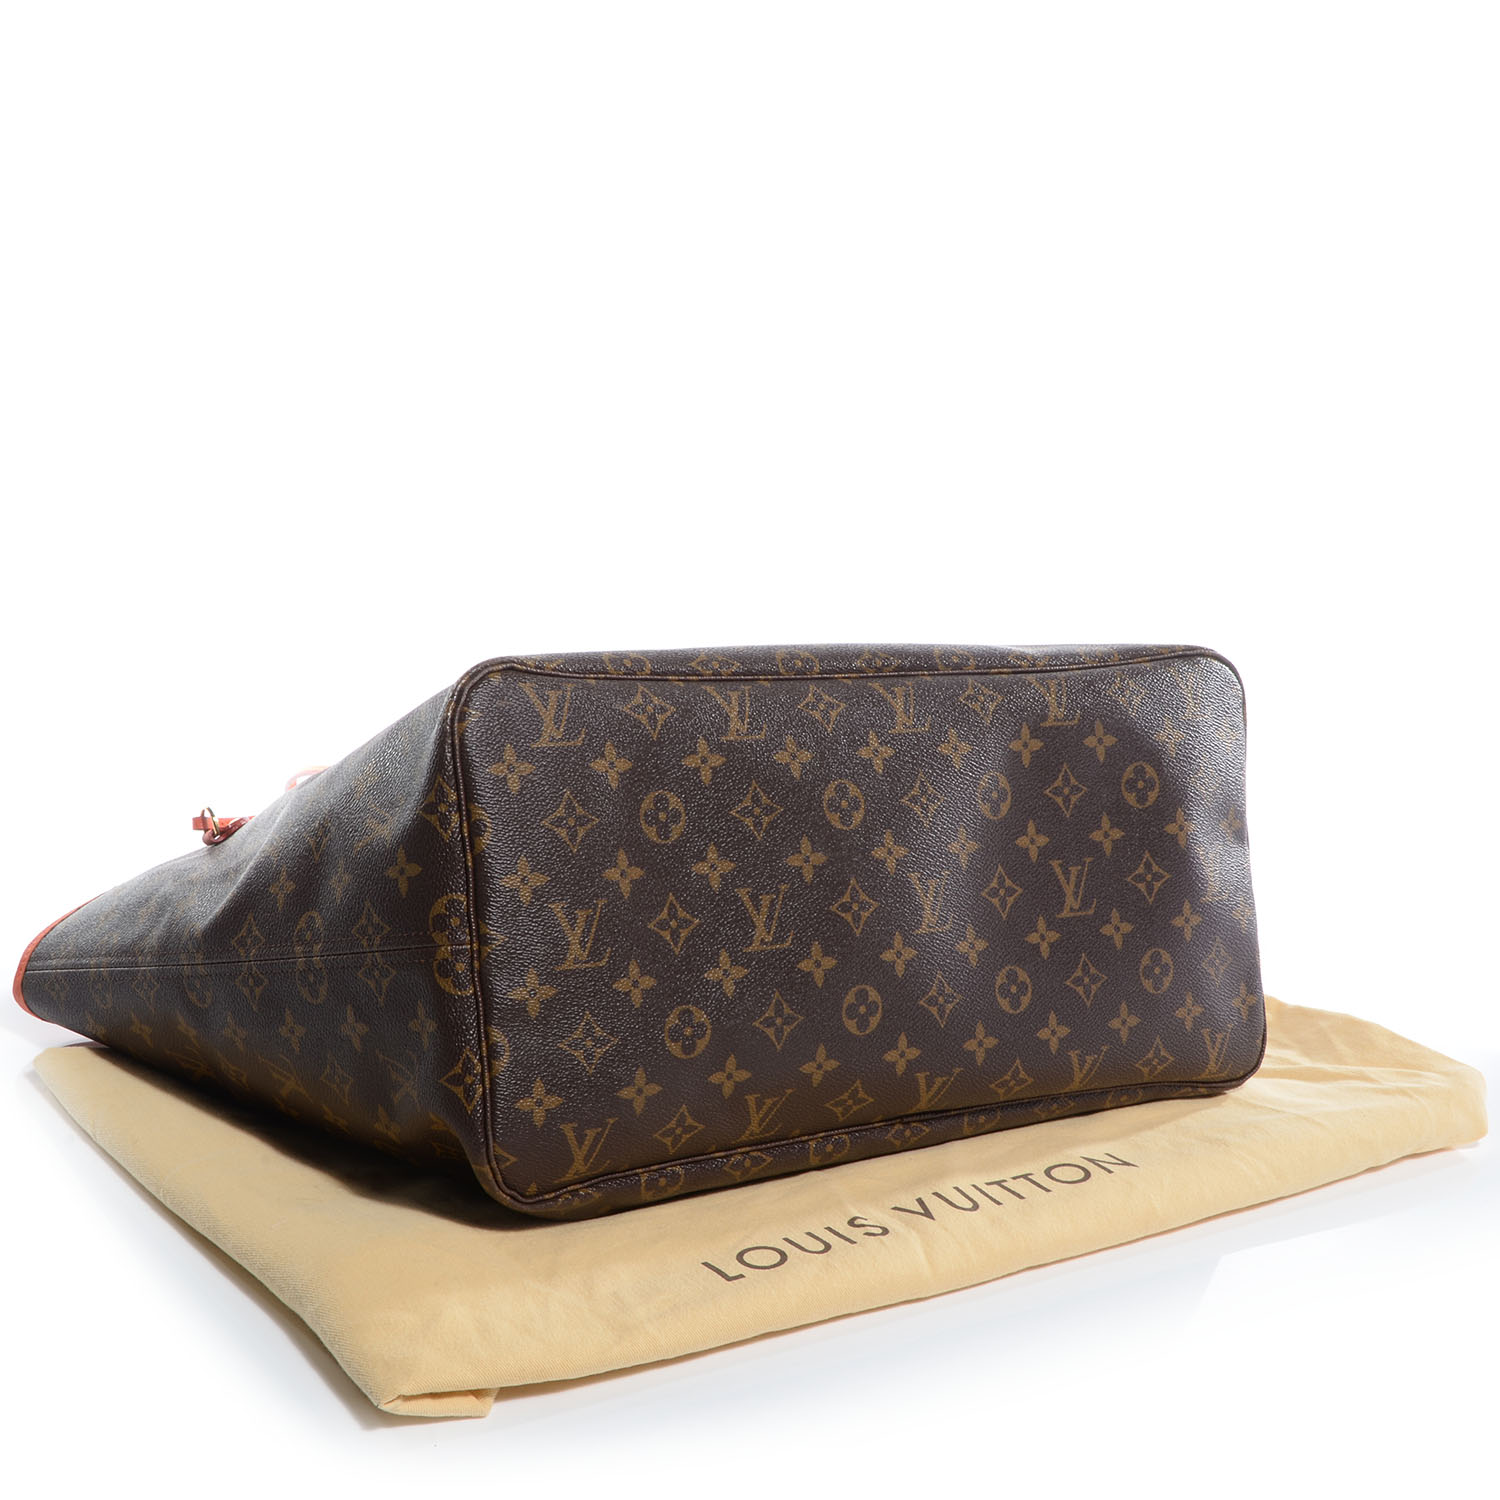 Louis Vuitton Monogram Turenne PM for Sale in Union City, CA - OfferUp